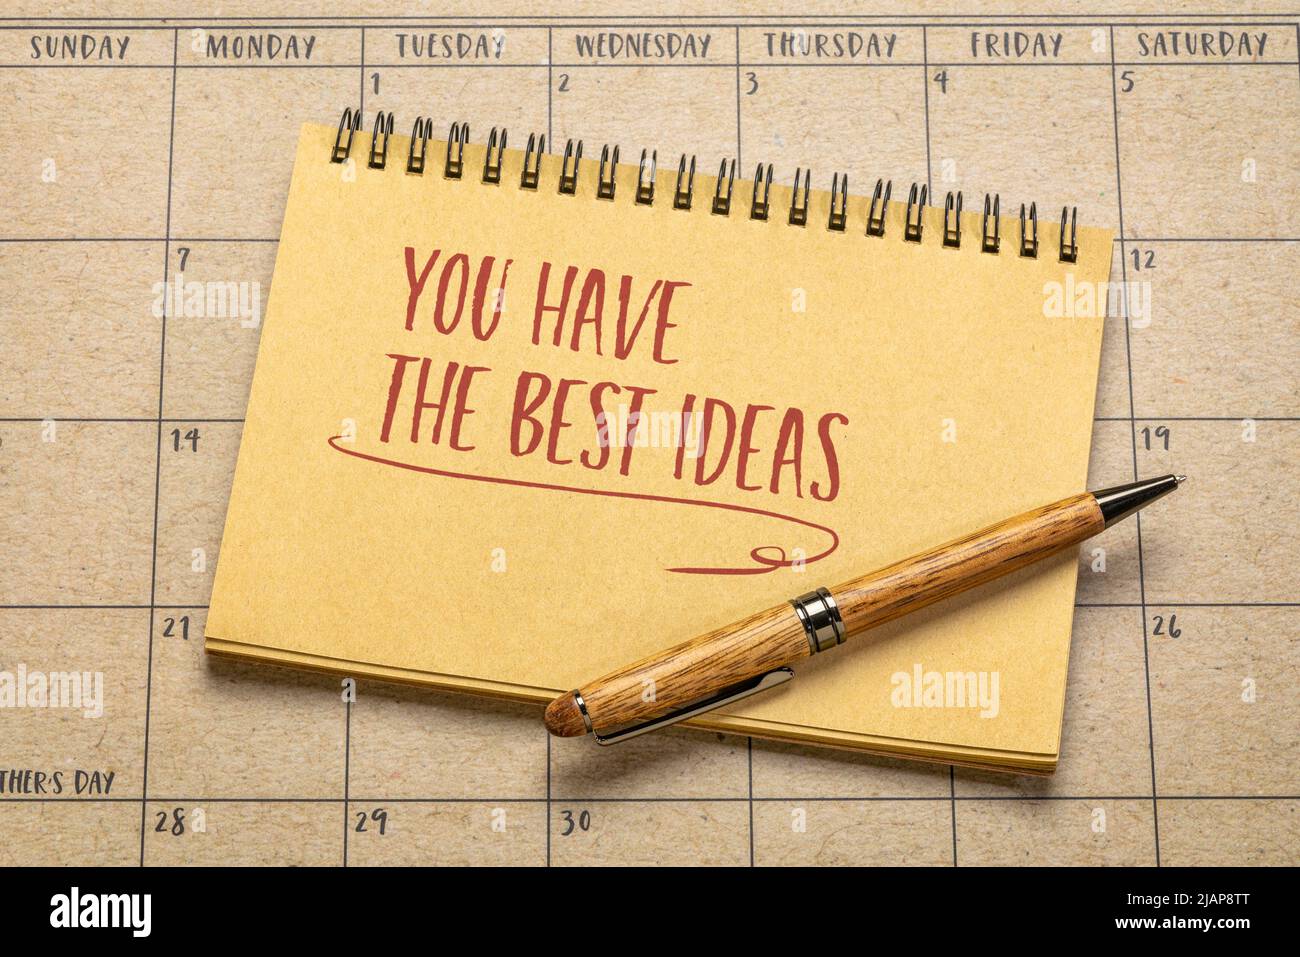 you have the best ideas - compliment or positive affirmation, handwriting in a sketchbook, creativity concept Stock Photo